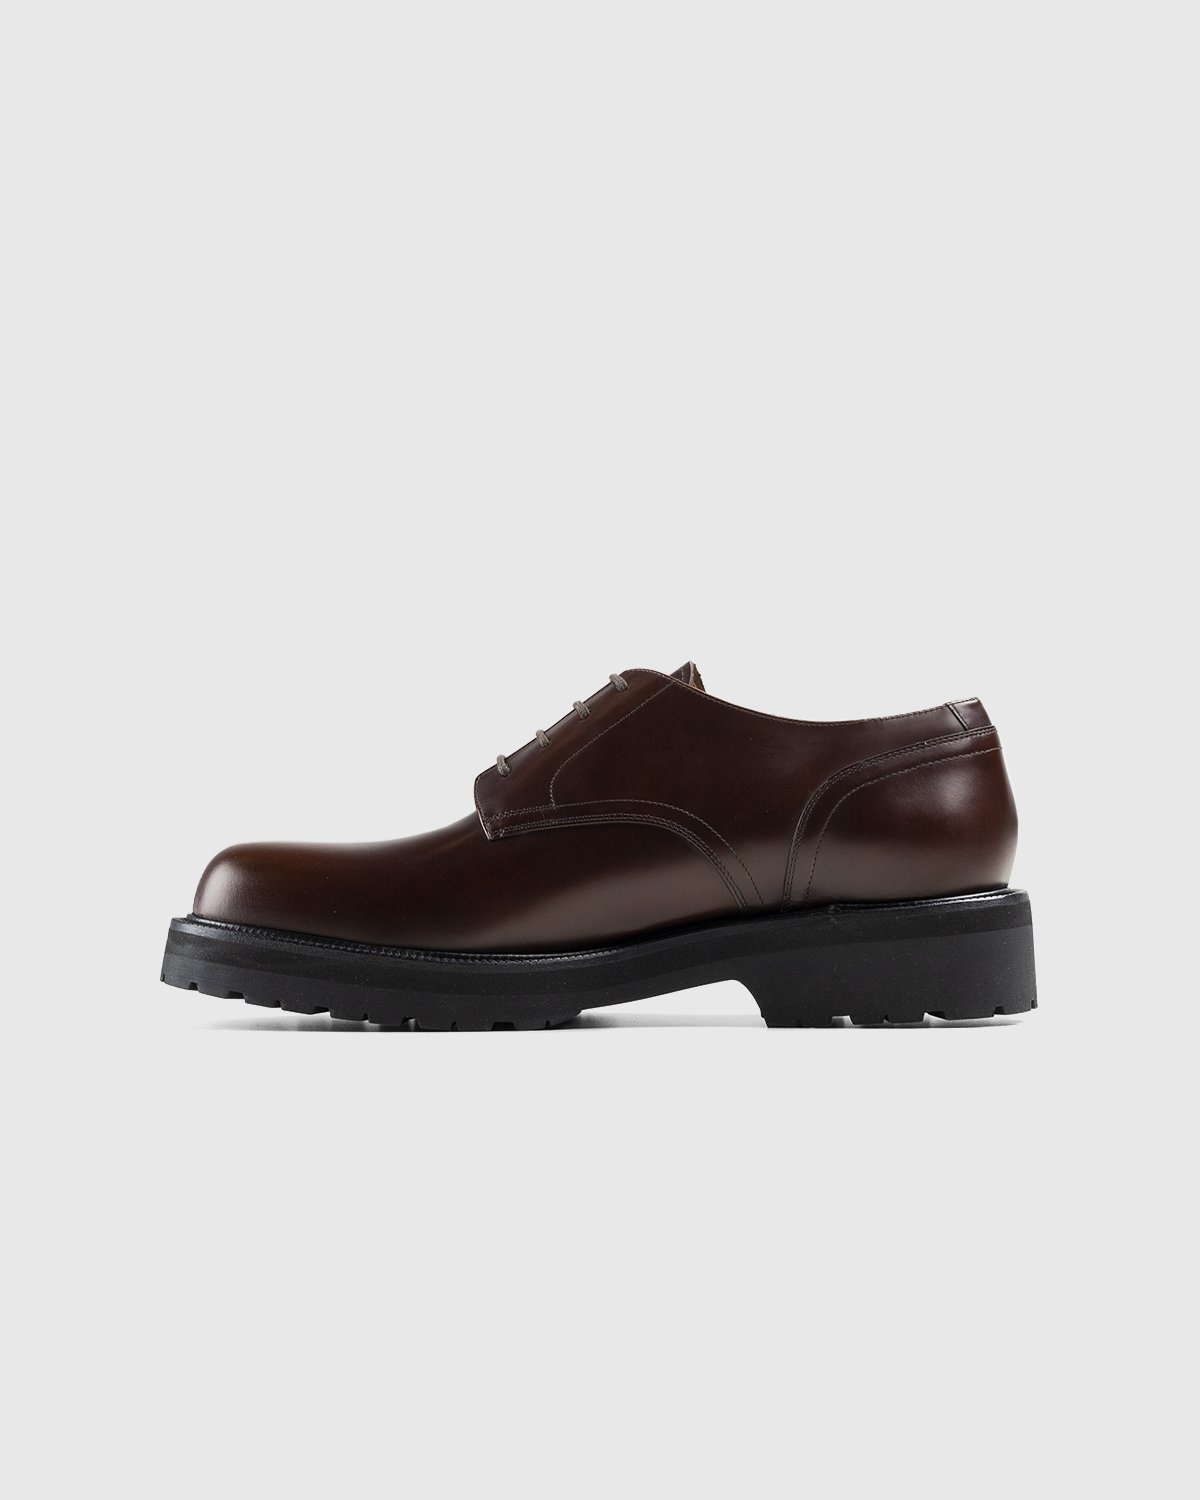 Dries van Noten – Leather Lace-Up Derby Shoes Brown - Shoes - Brown - Image 2